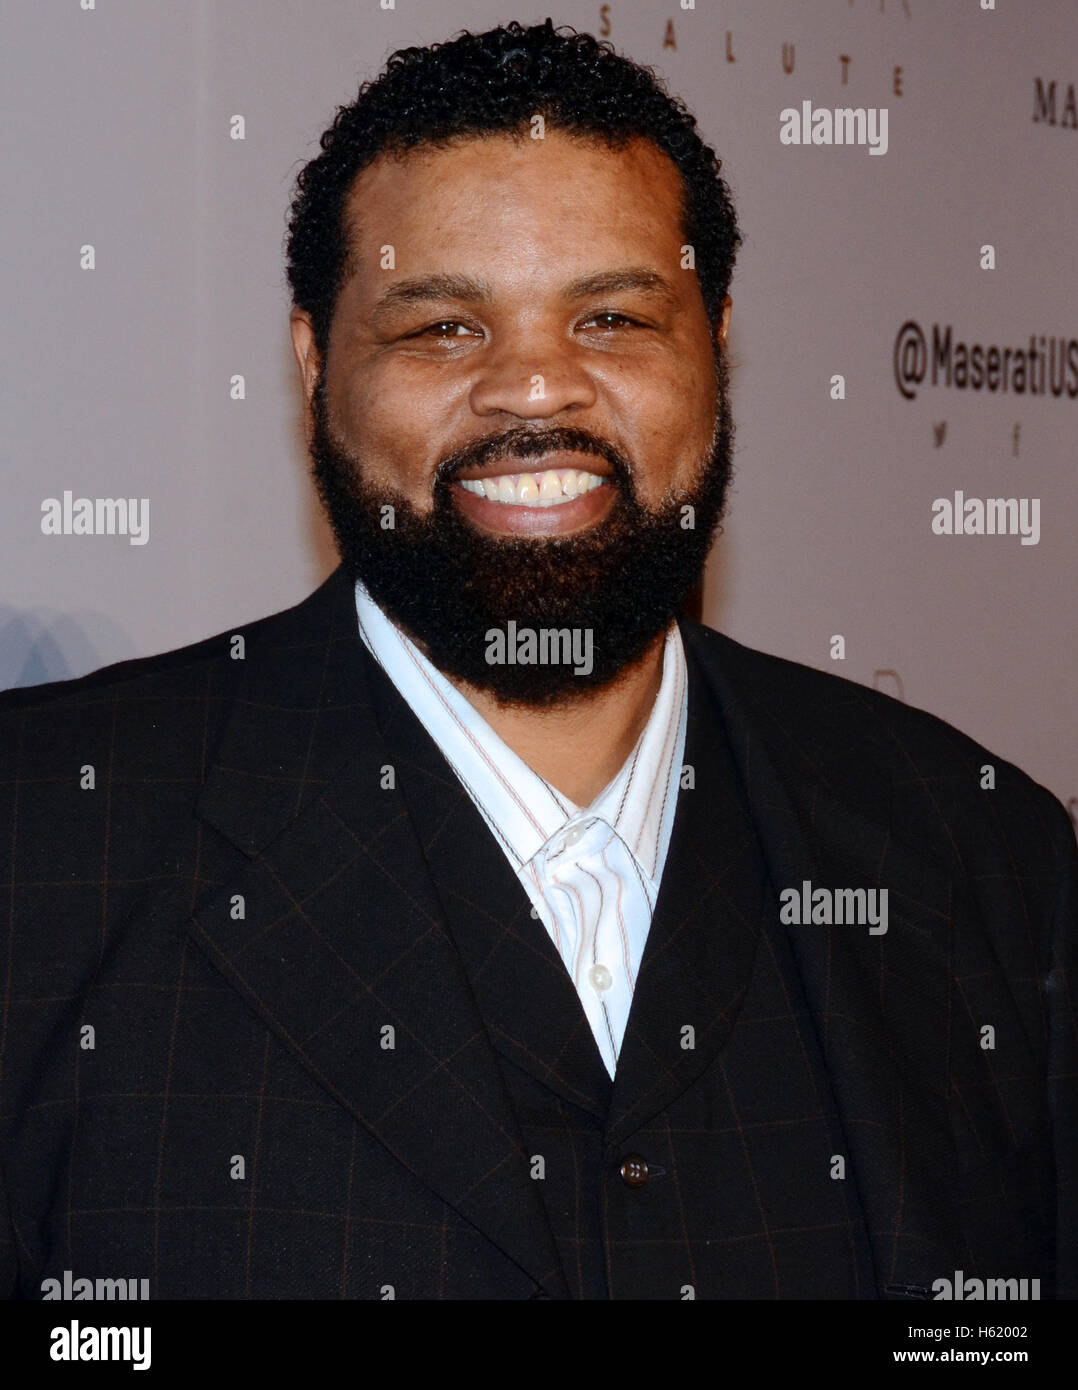 Andre Farr arrives at the Oscar Salute Hosted By Kevin Hart - Academy Awards Screening And After-Party Stock Photo